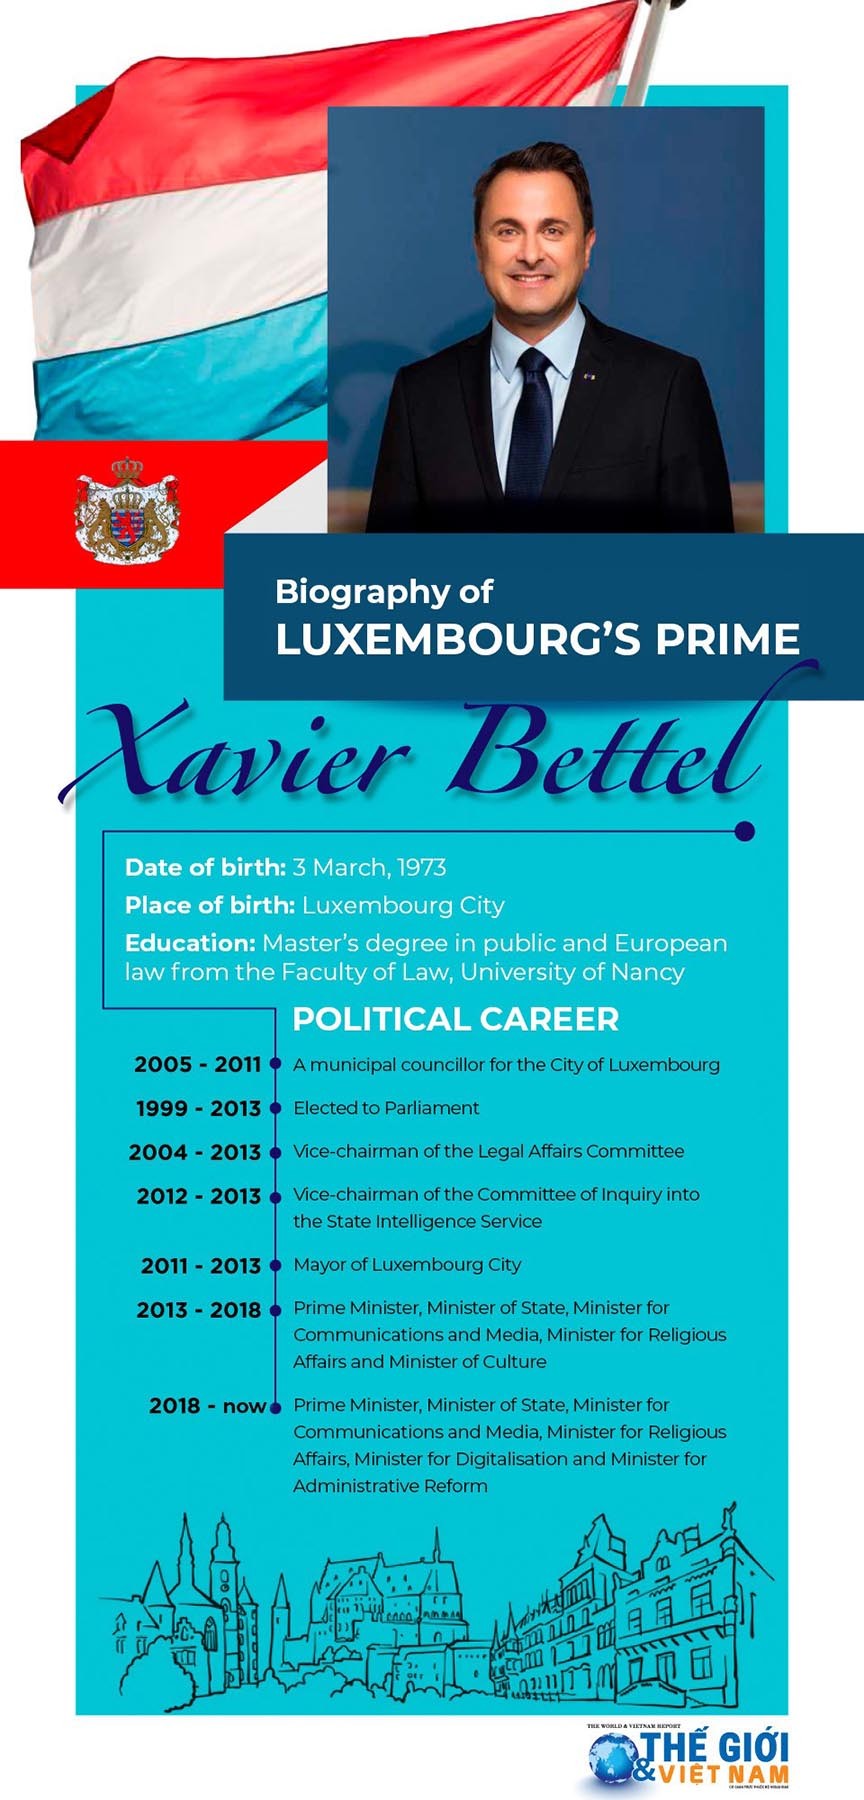 PM Pham Minh Chinh hosts welcome ceremony for Luxembourg’s PM Xavier Bettel